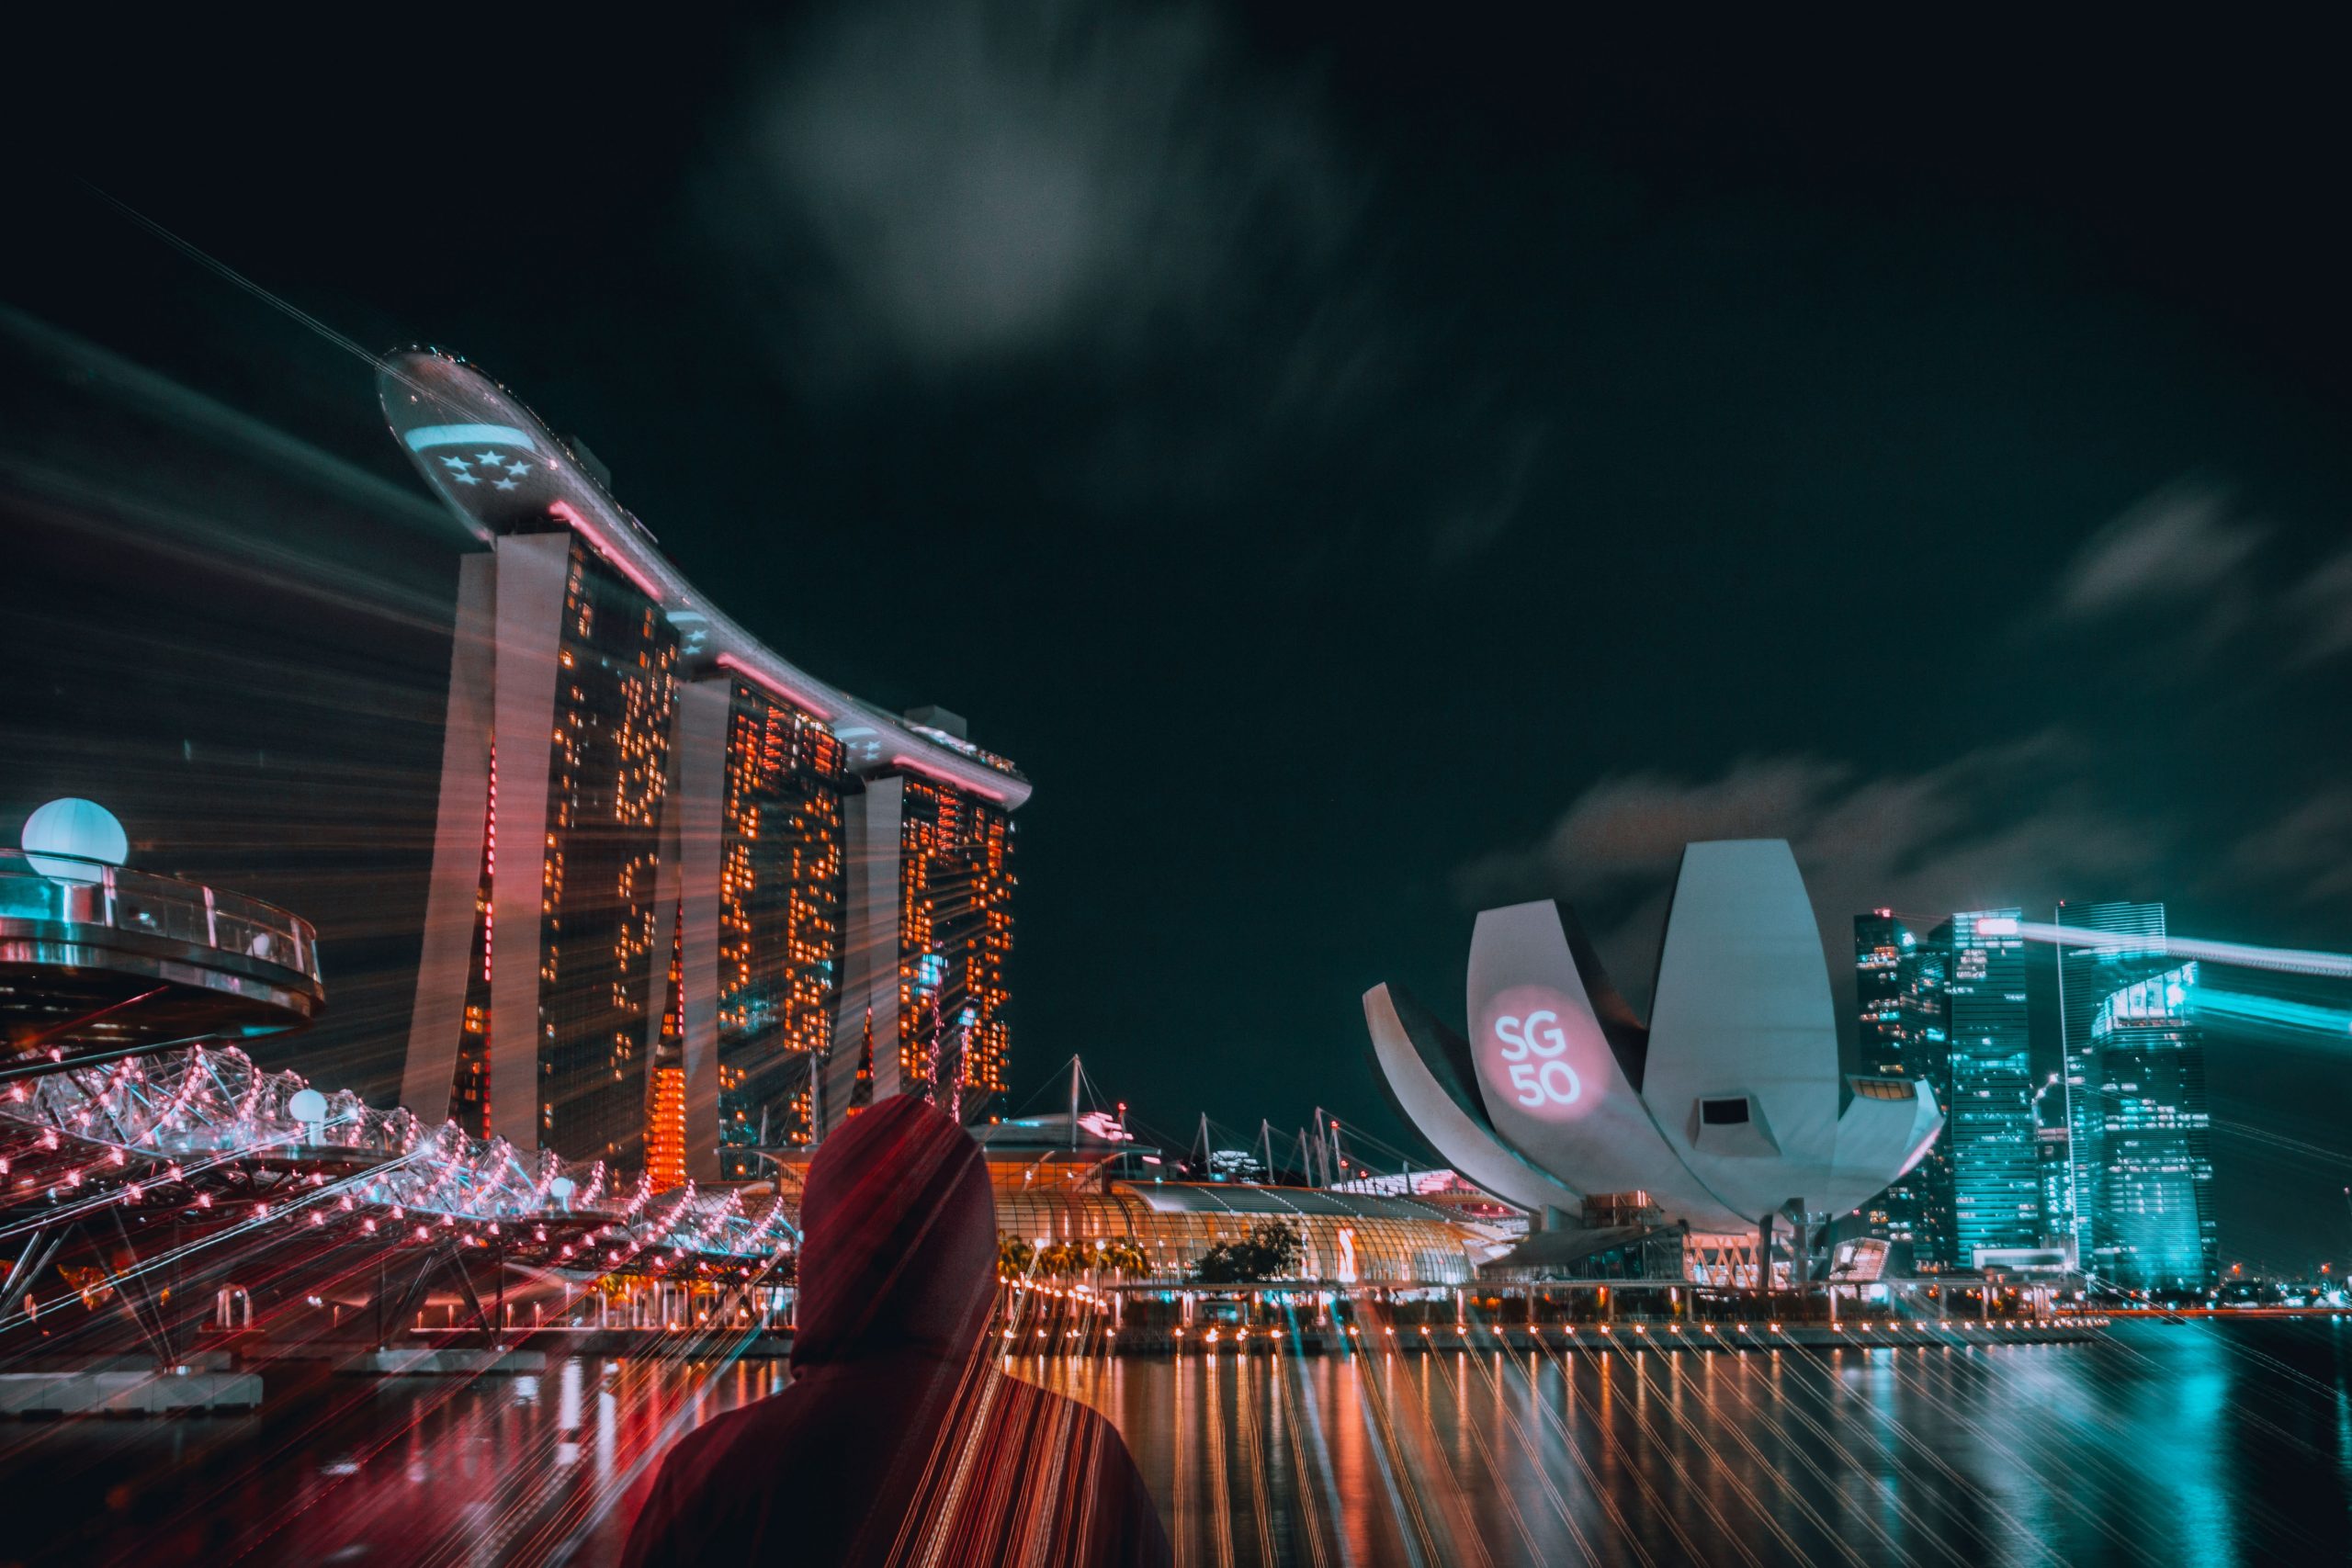 Best things to do in Singapore at night (2020) Singapore Tourism